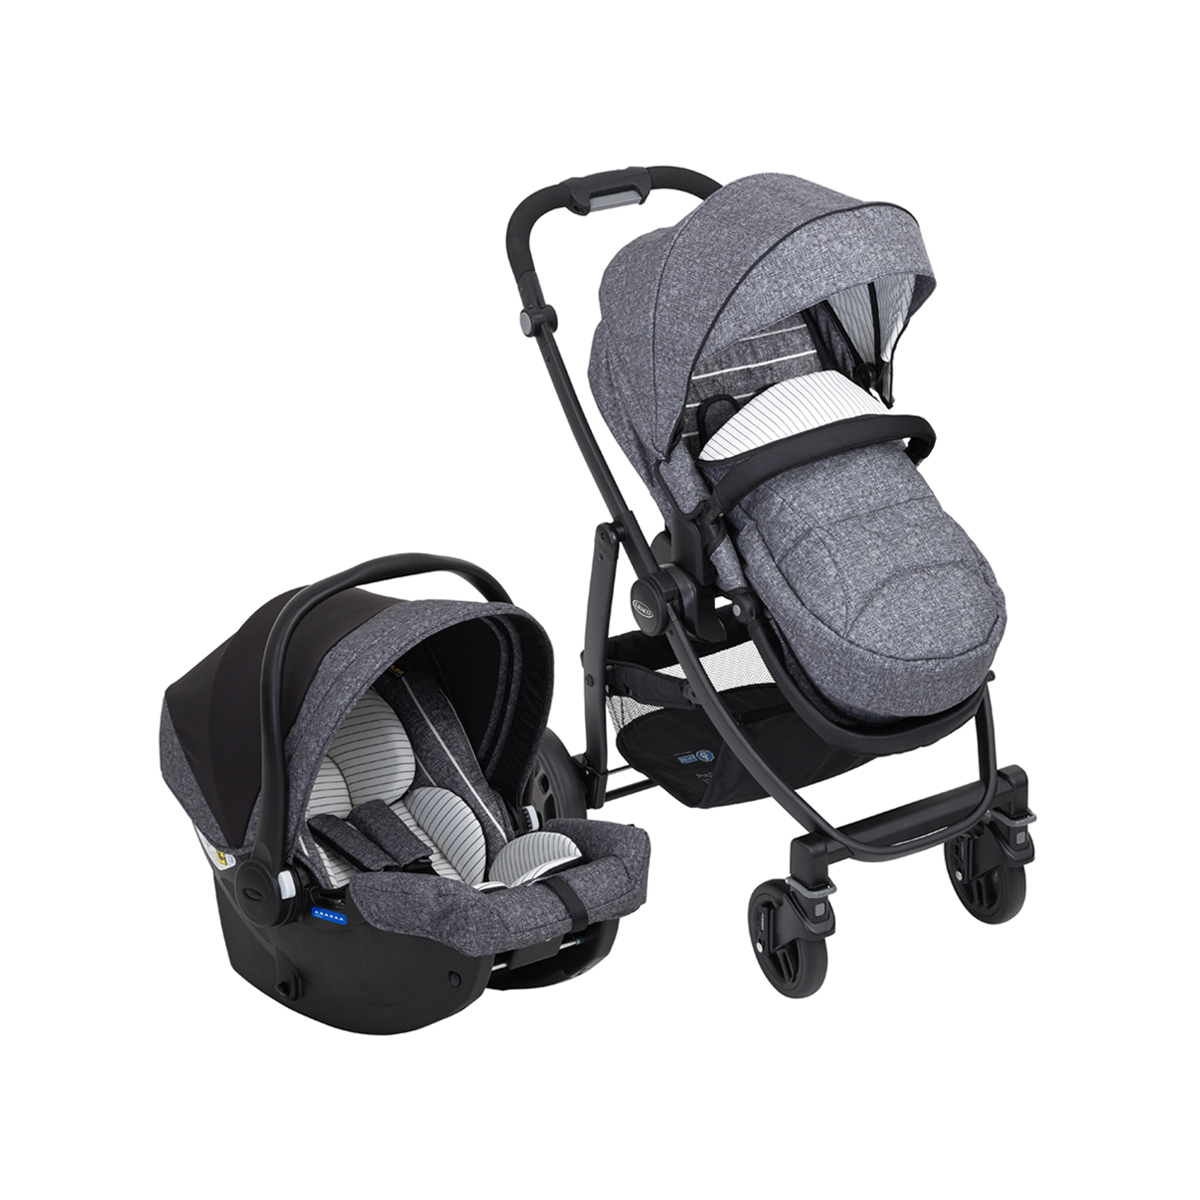 Graco Evo Travel system with Graco Evo pushchair and SnugEssentials i-Size infant car seat